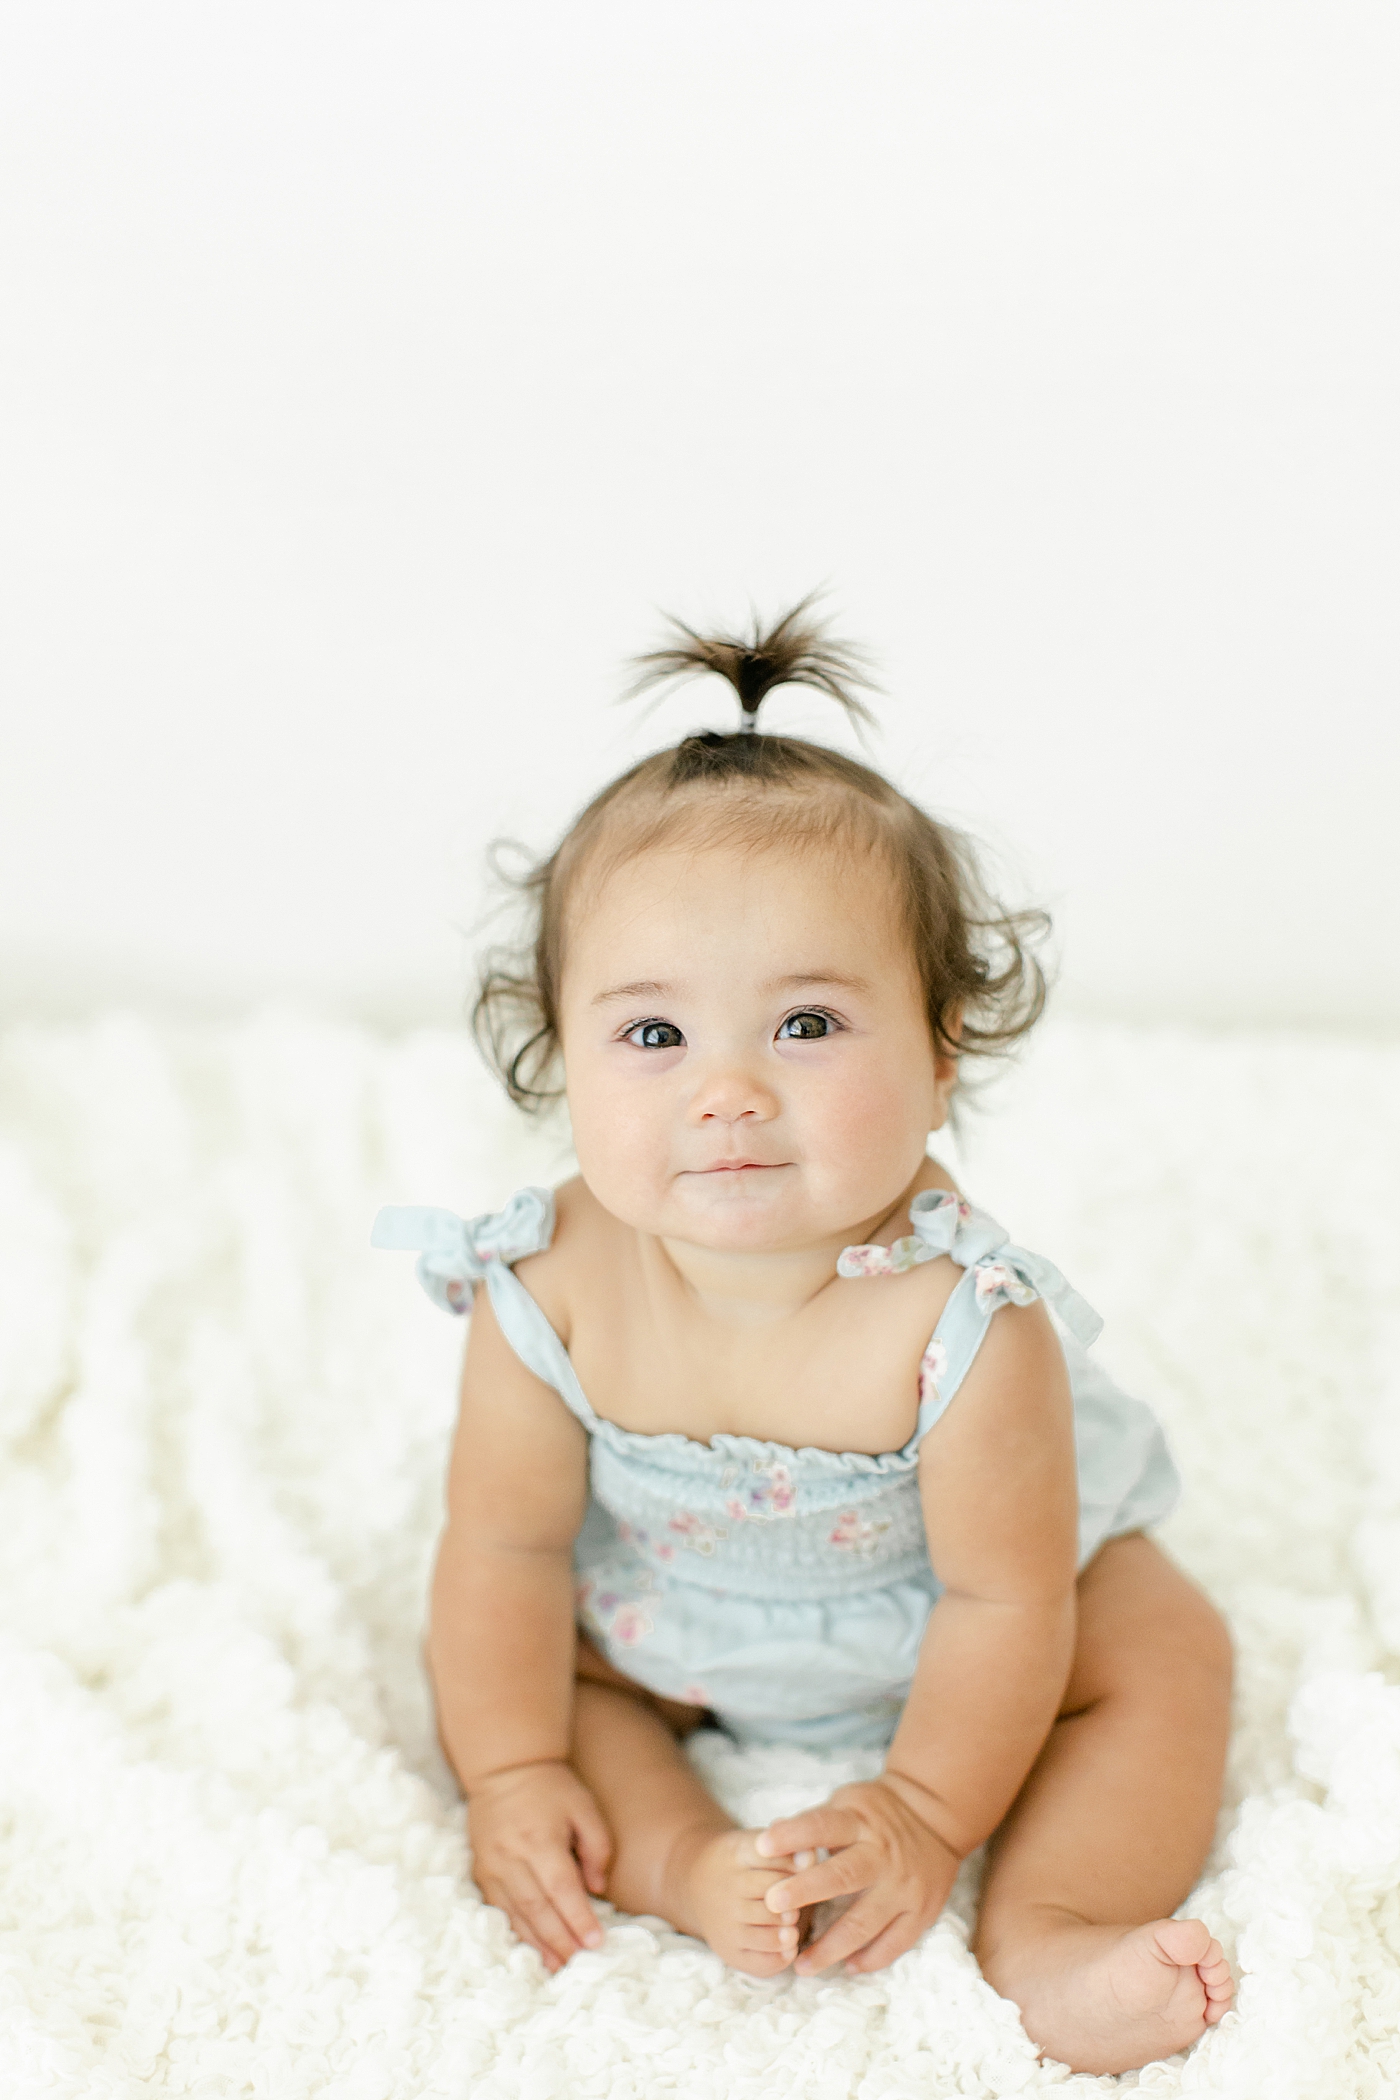 Baby girl in a blue jumper during her Six Month Studio Session | Image by Chrissy Winchester Photography